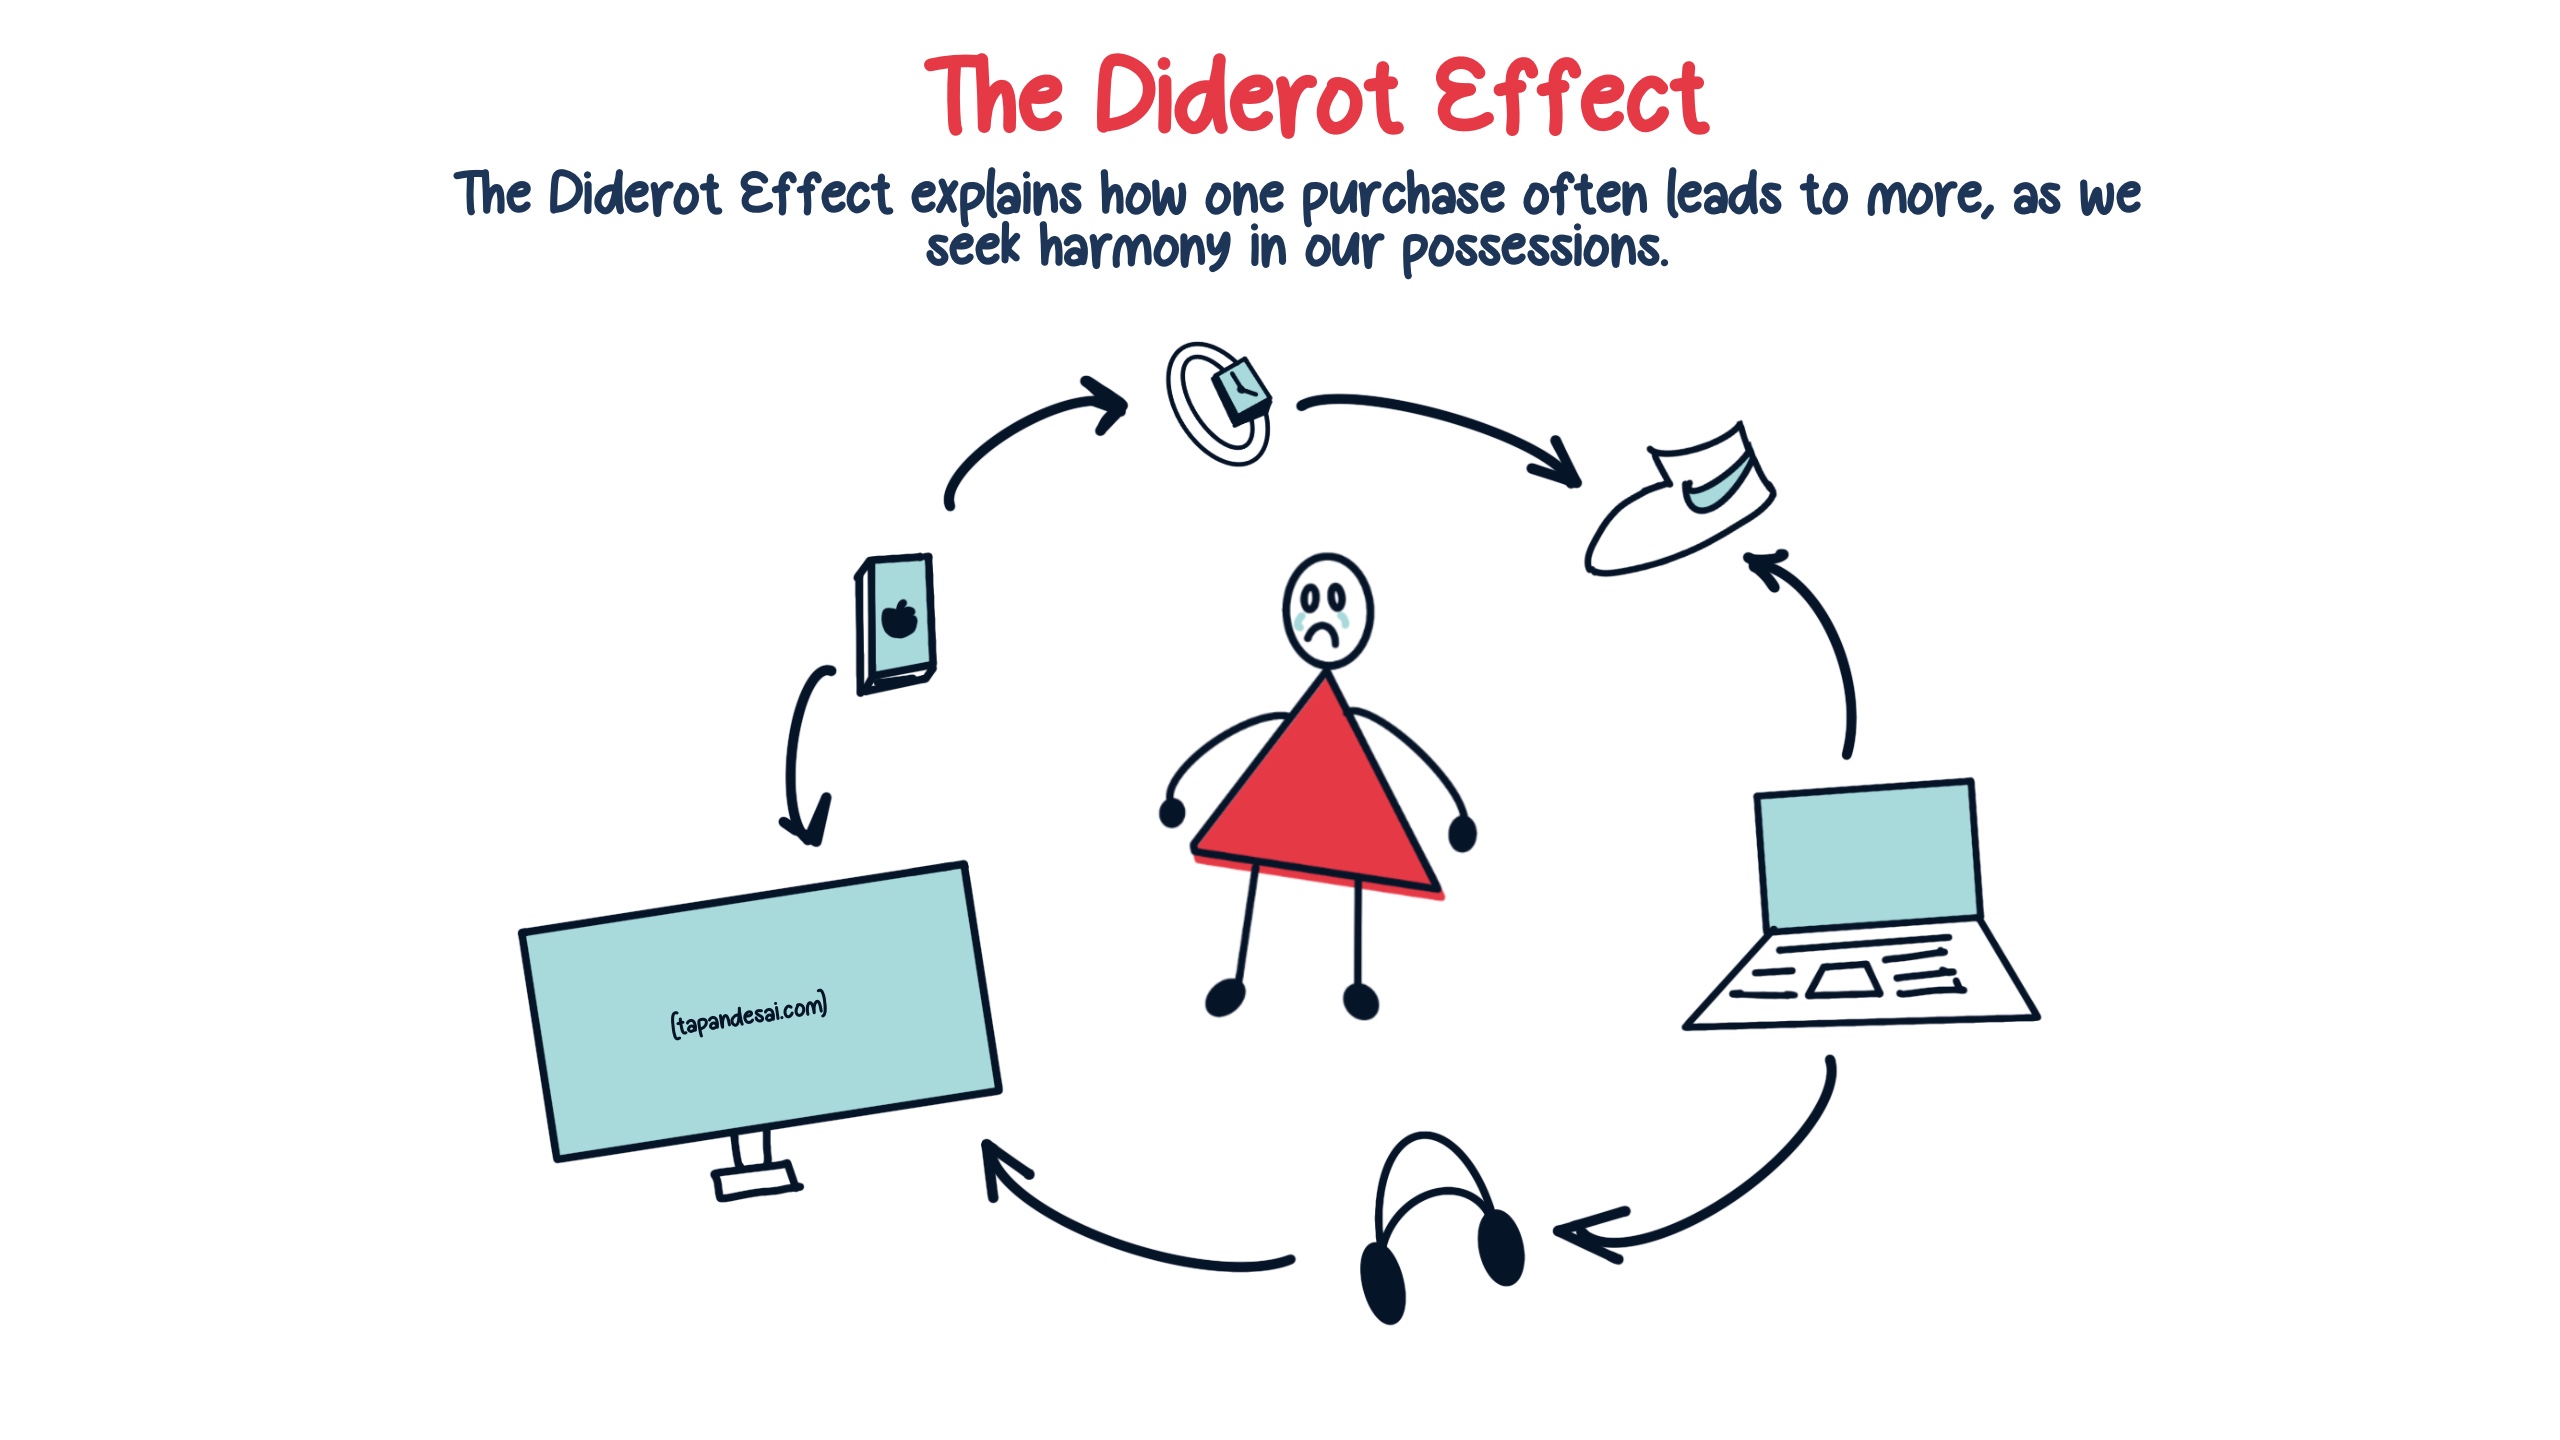 An illustrative diagram of the Diderot Effect, showcasing a central stick figure surrounded by a circular arrow connecting tech items like a smartphone, a watch, a hat, a laptop, and headphones, with a text header explaining the Diderot Effect as the phenomenon where one purchase leads to additional ones to maintain possession harmony.